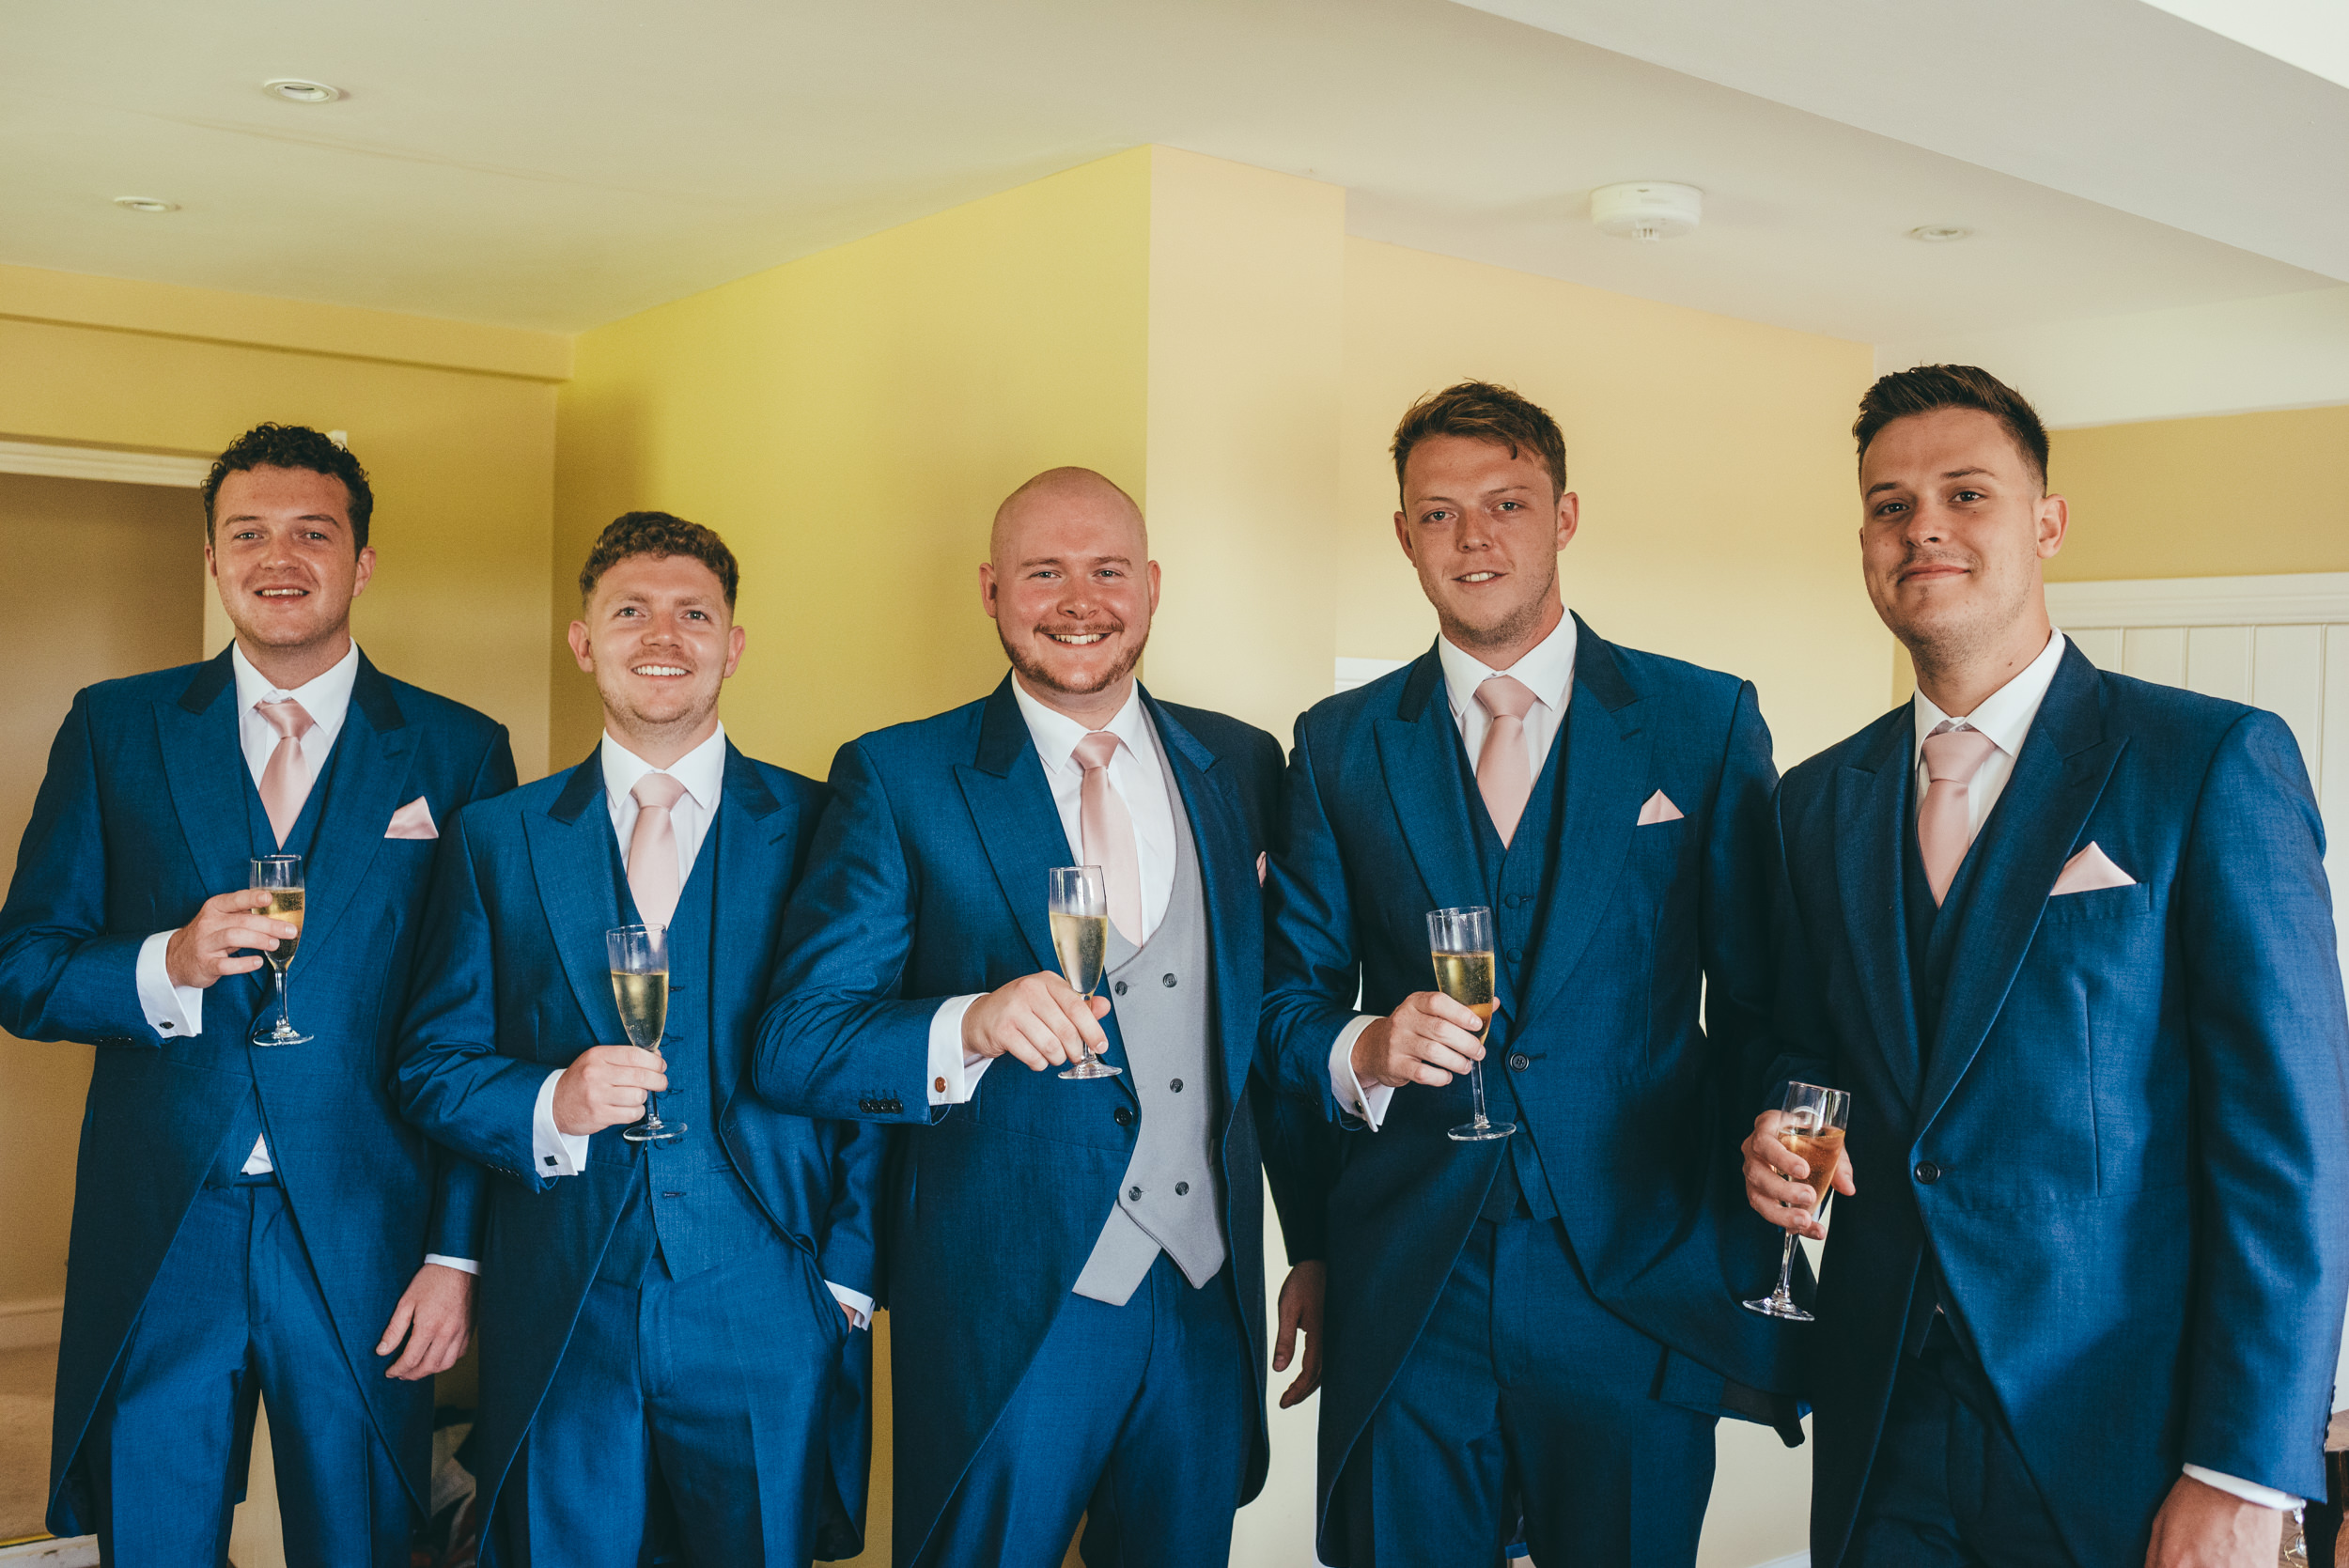 group photograph of the groomsman